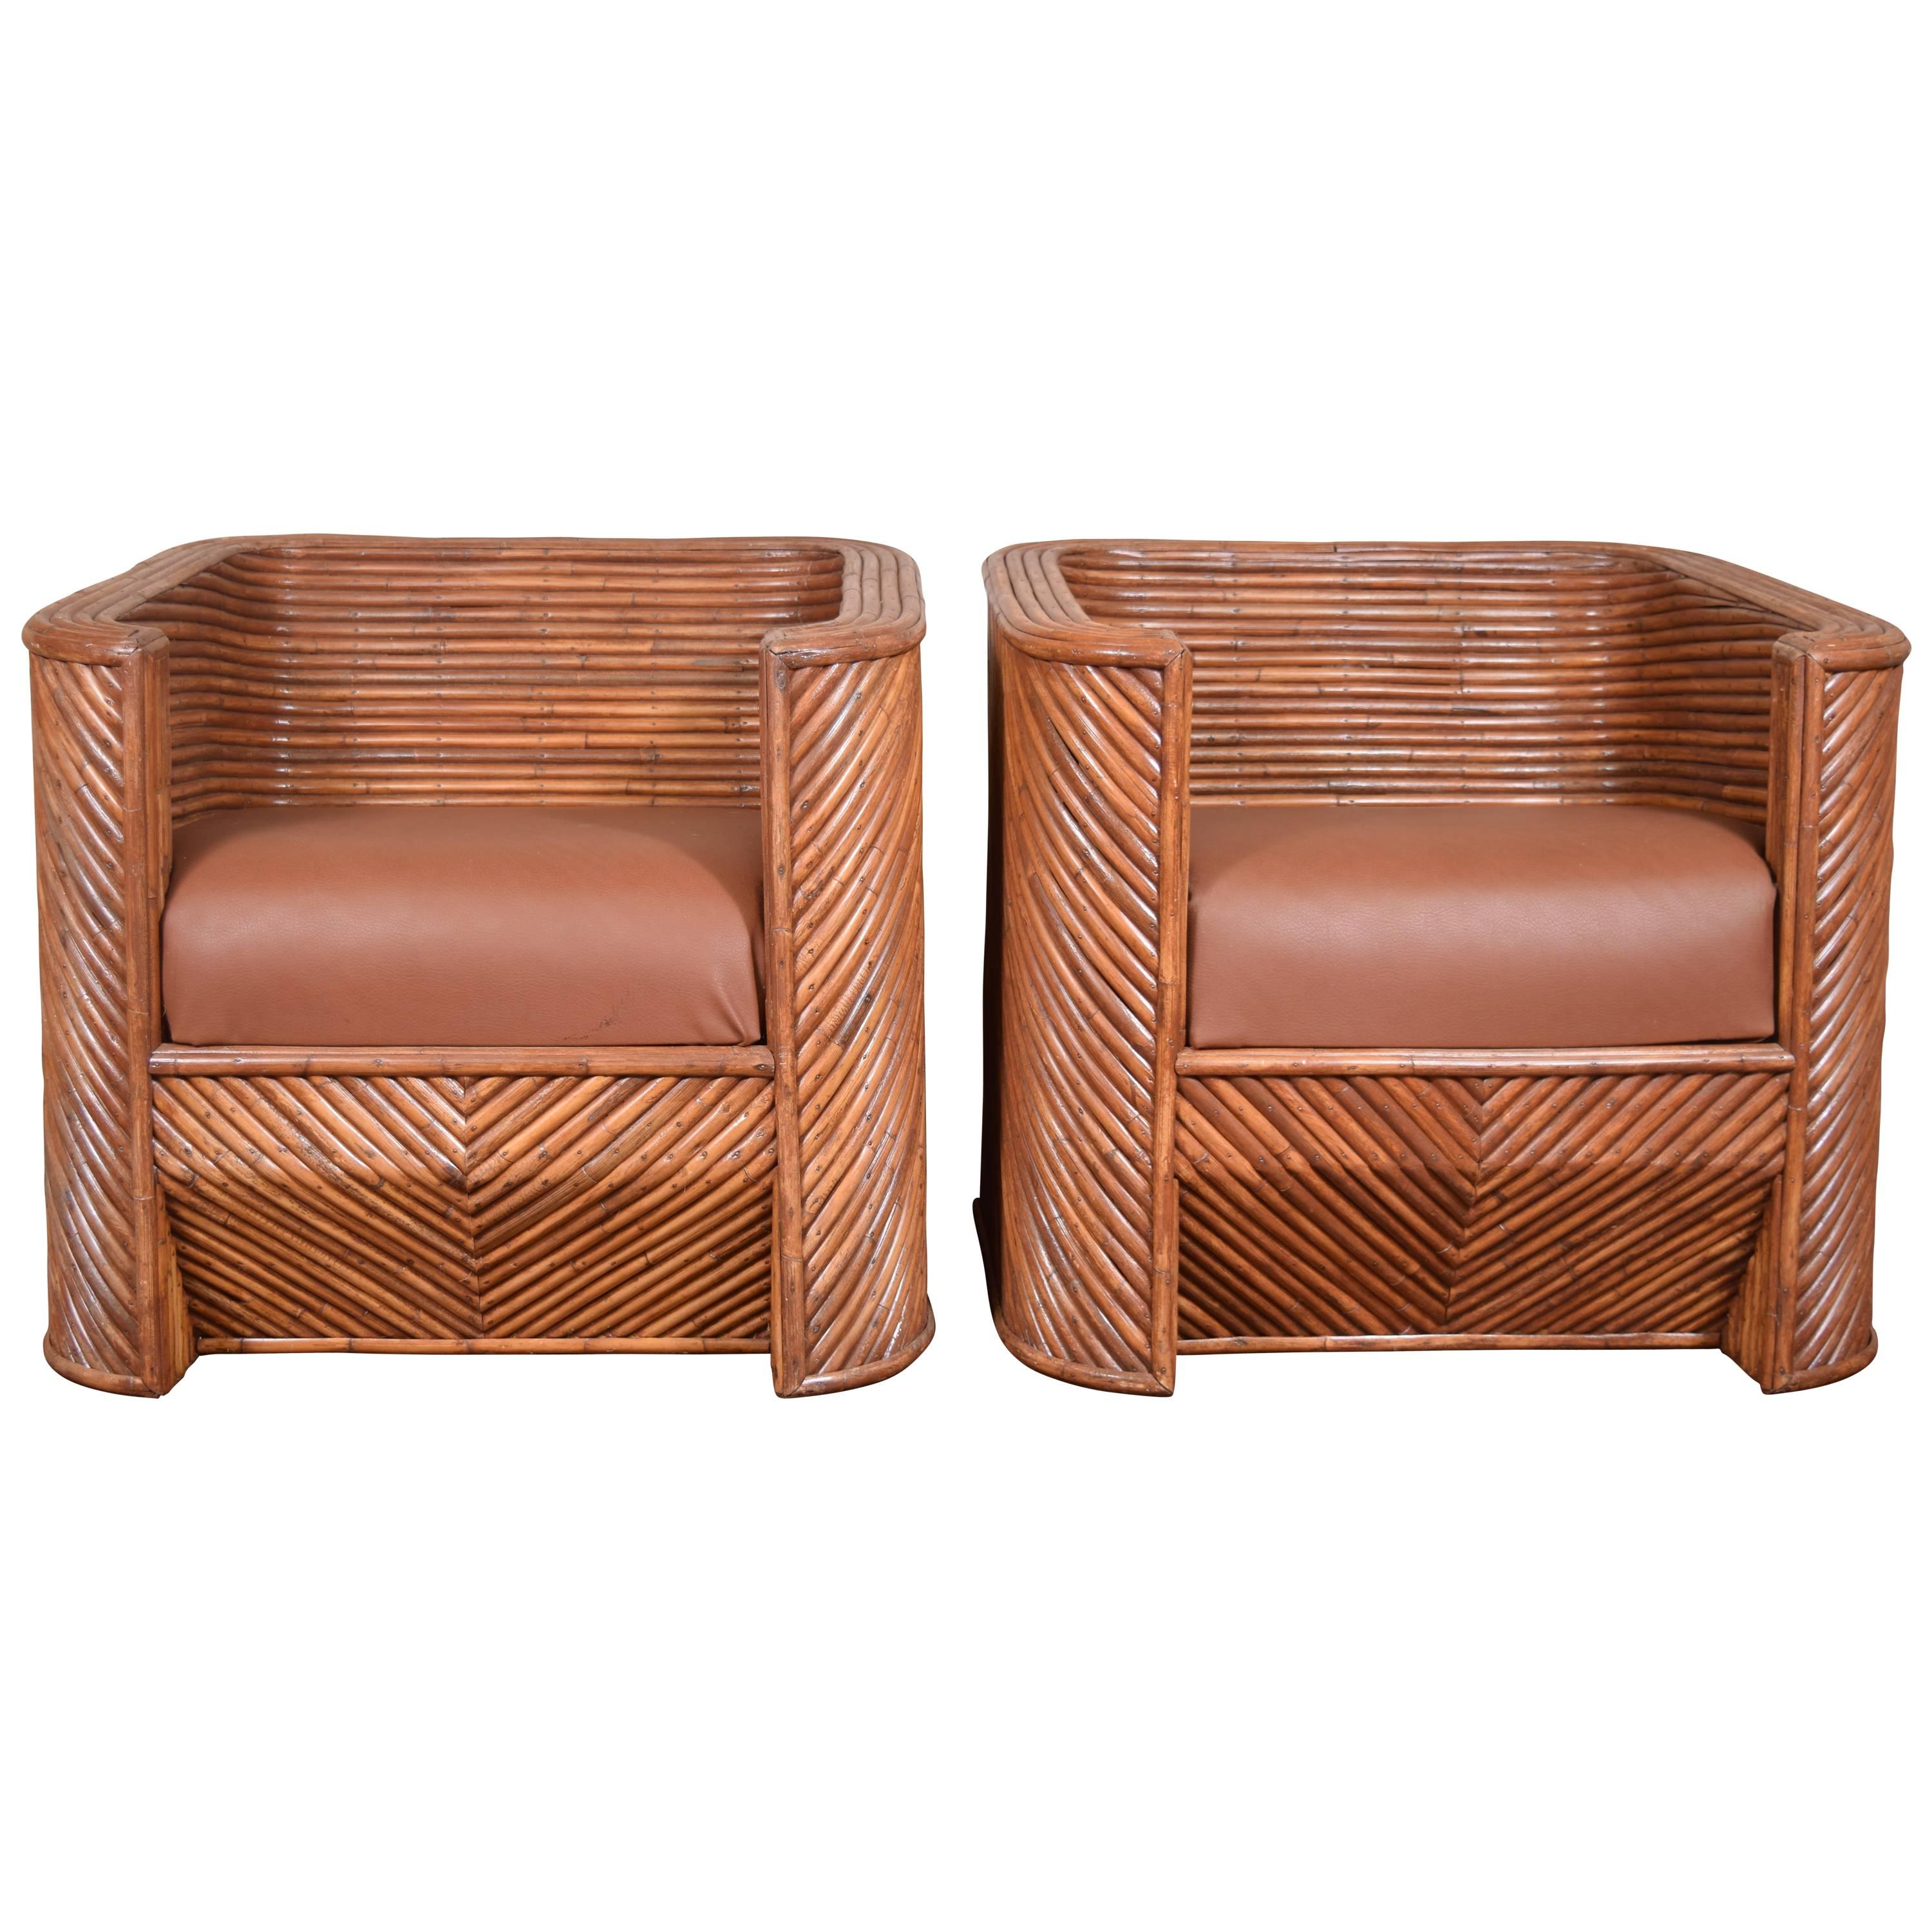 Pair of Bamboo Club Chairs For Sale